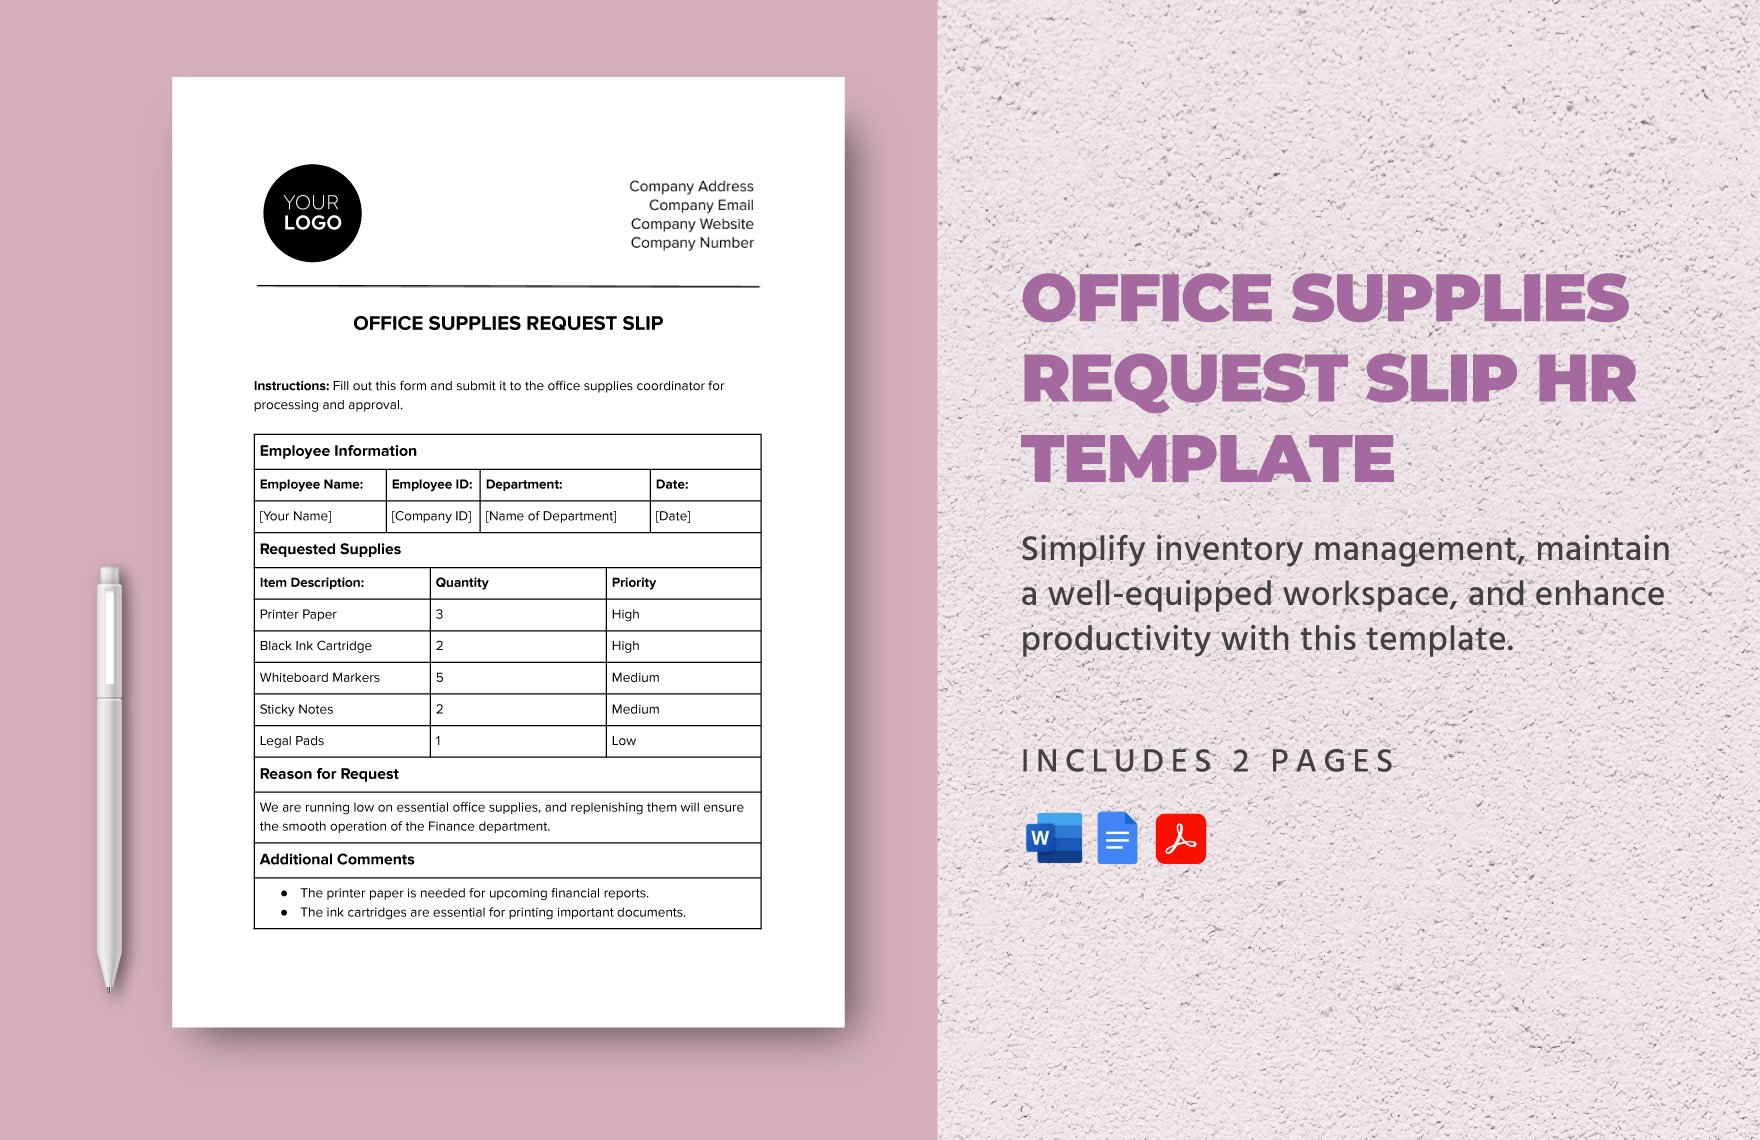 Office Supplies Request Slip HR Template in Word, Google Docs, PDF